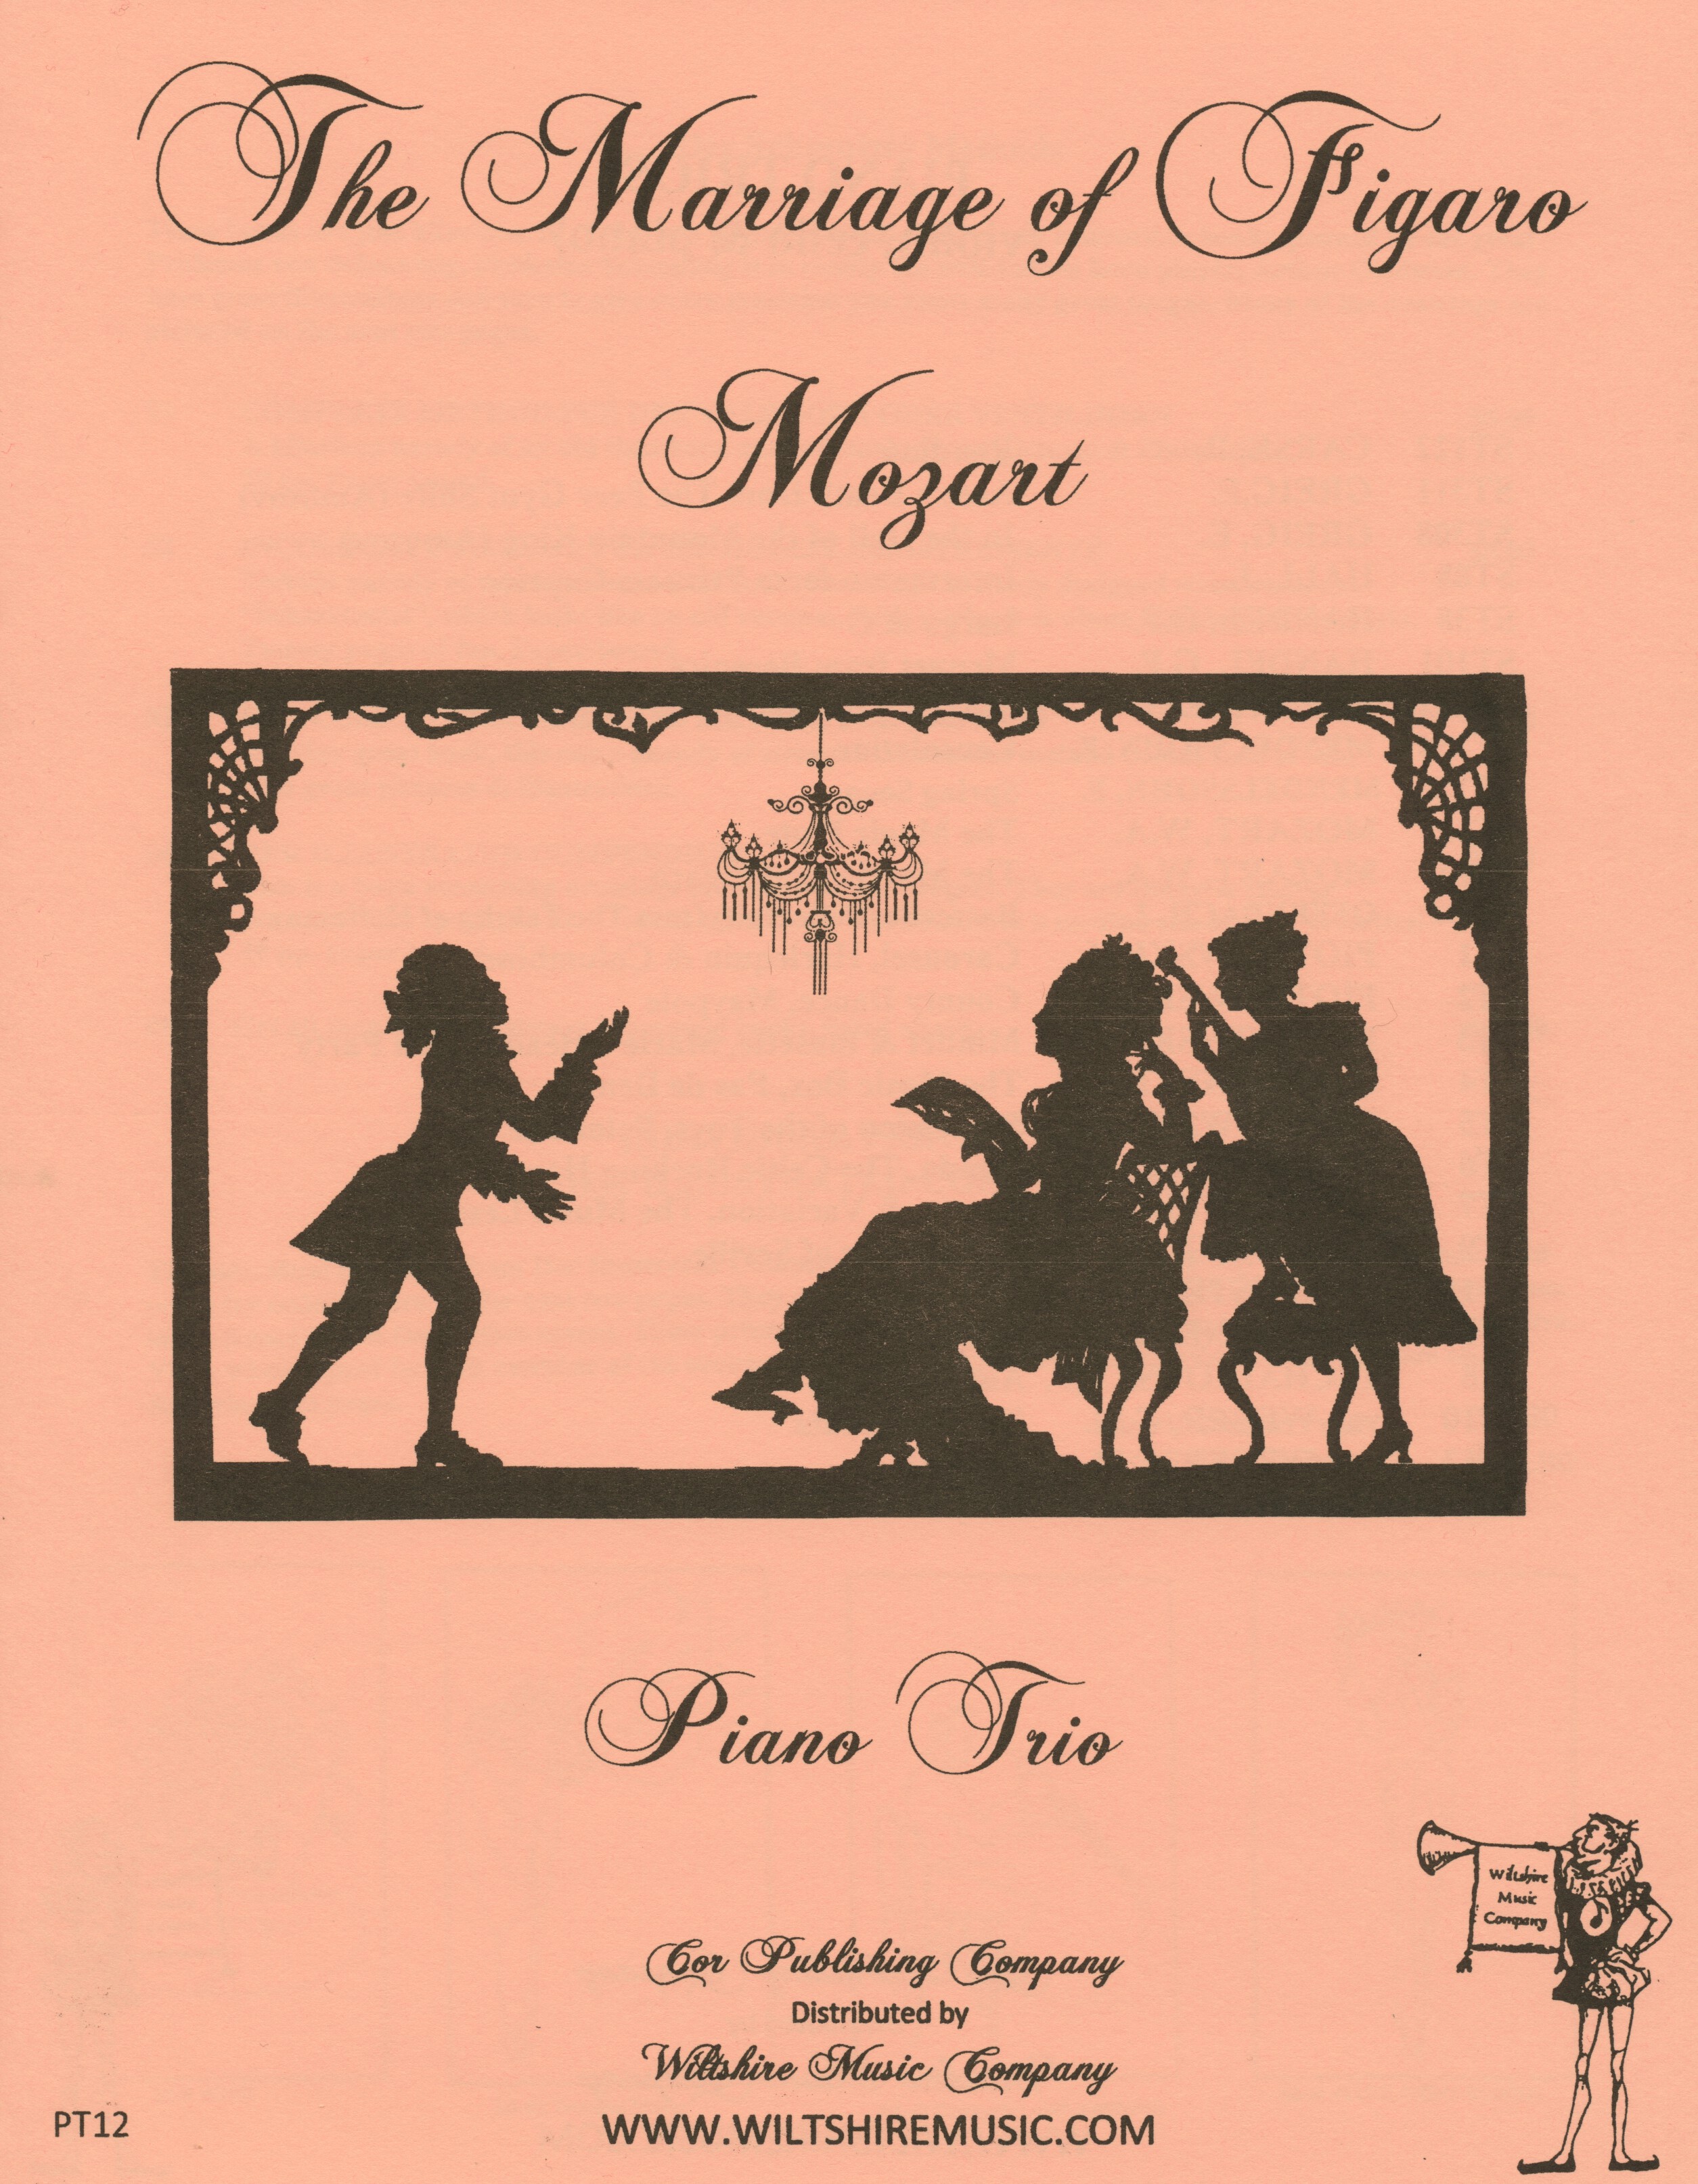 The Marriage of Figaro, W. A. Mozart